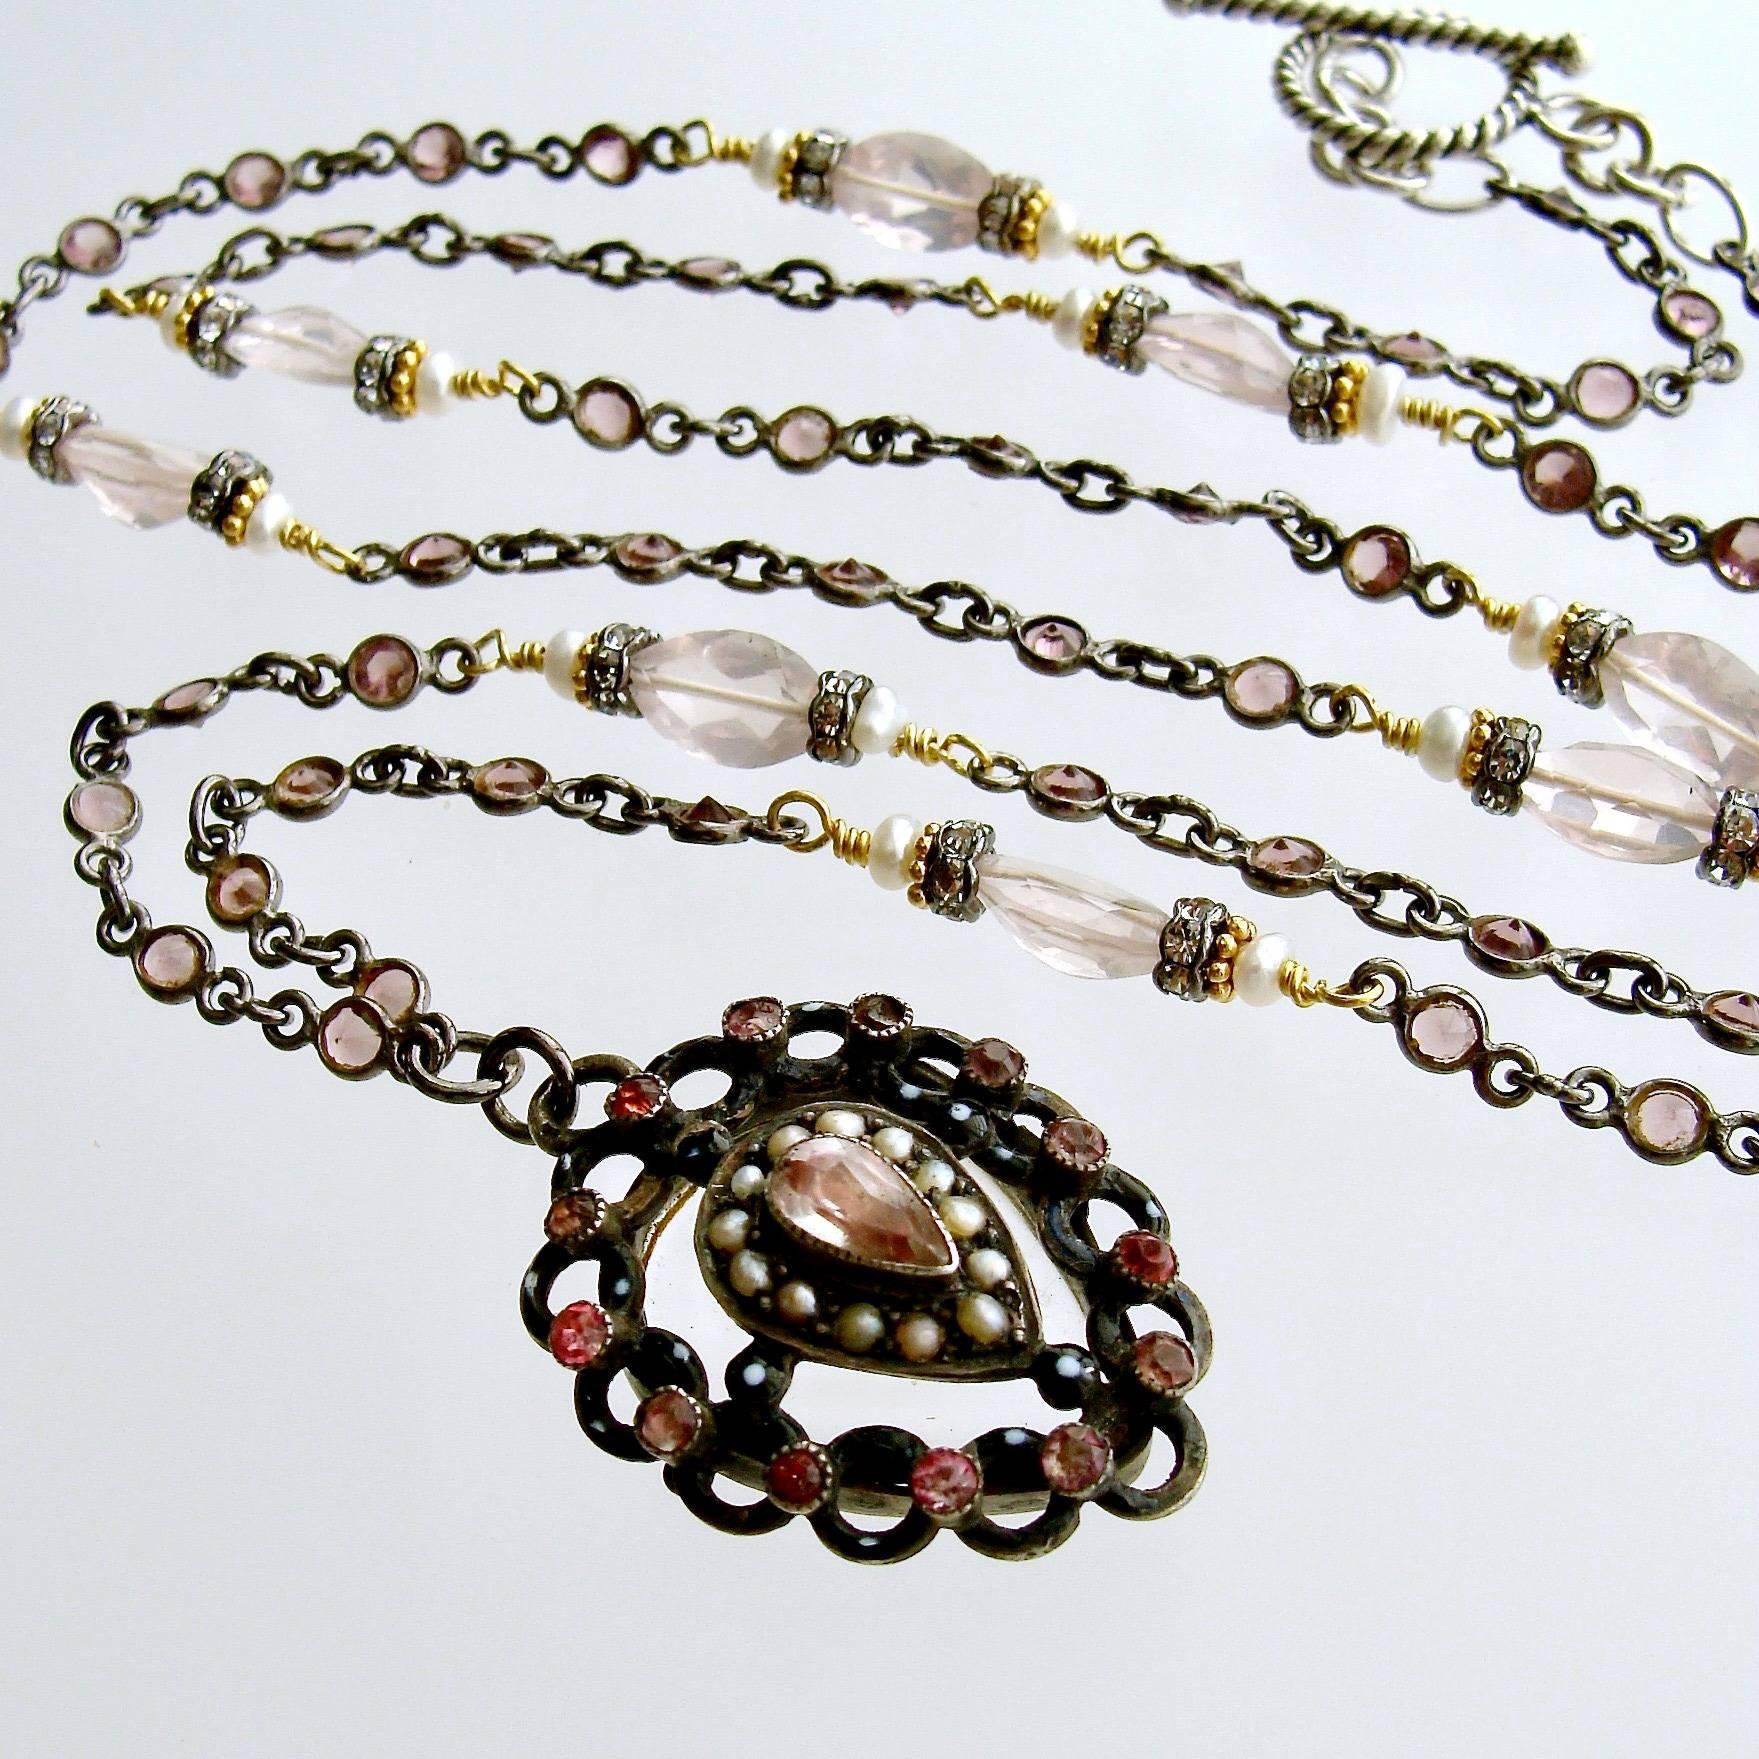 Micheline Necklace.

Delicate pink tourmaline has been bezel set in oxidized silver and intercepted with marquise cut rose quartz, flanked with seed pearls and crystal rondelles.  The beautiful confectionary coloring of the stones repeats the